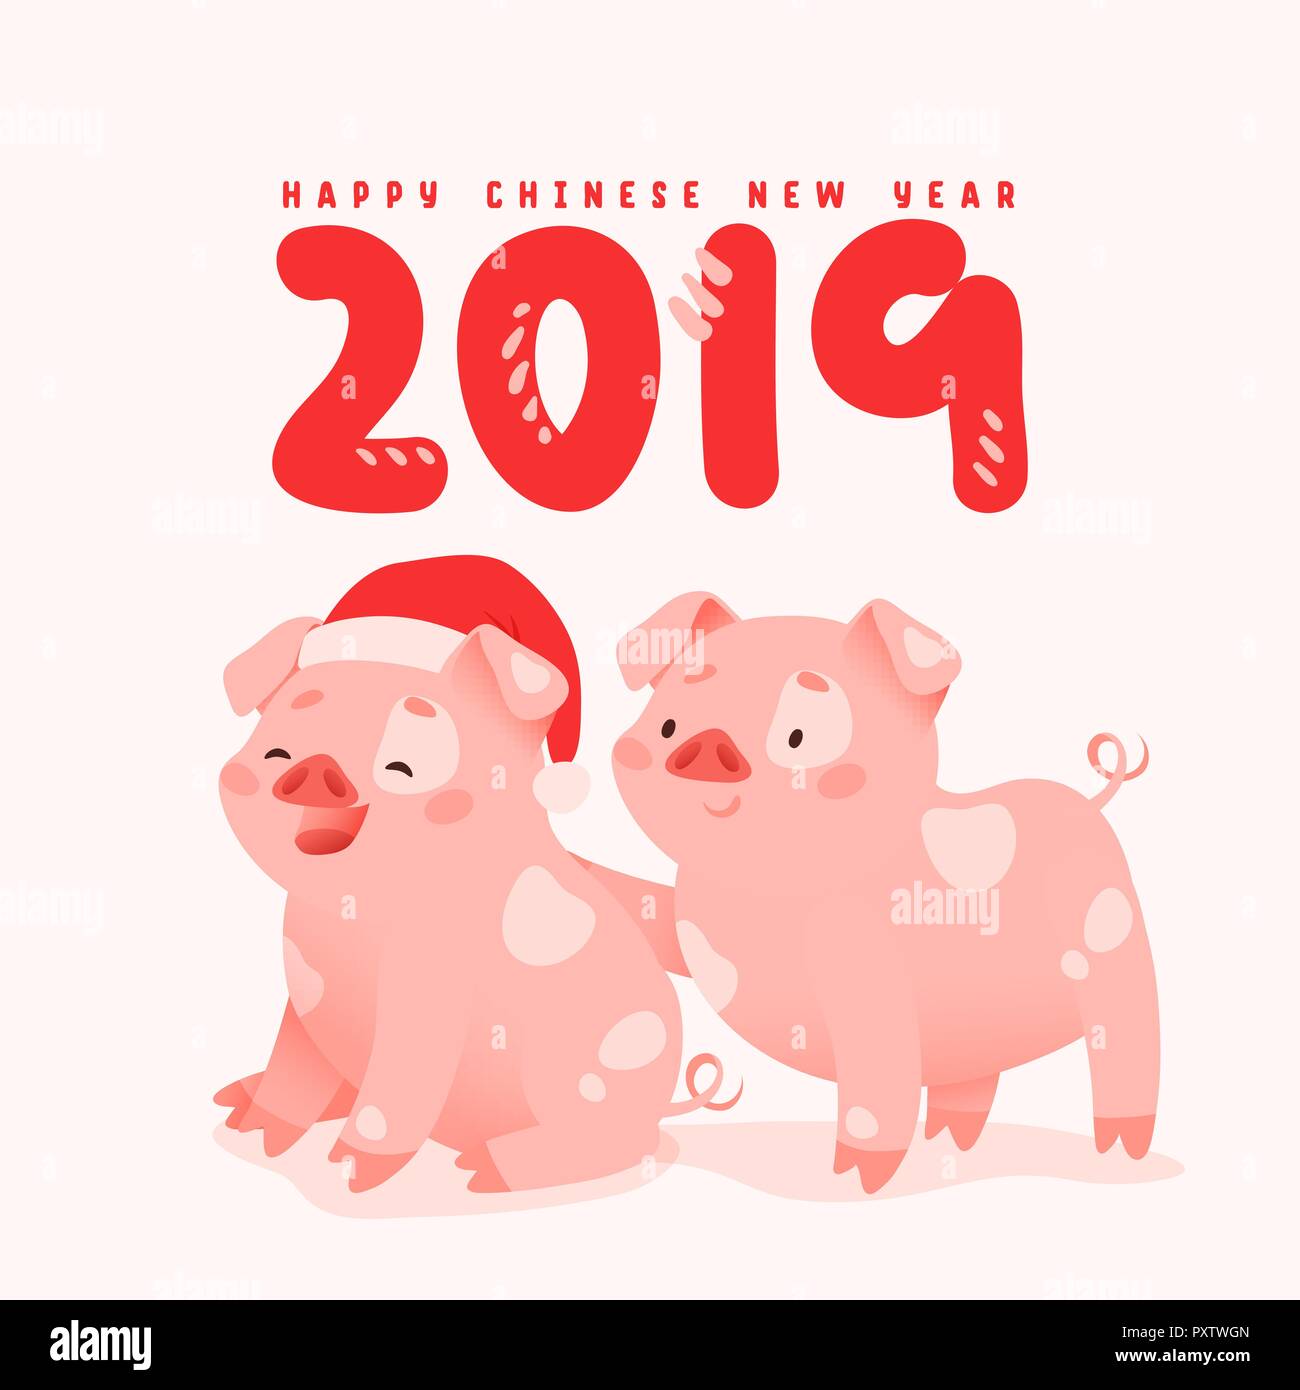 2019 Chinese New Year. Zodiac sign Year of the pig. Stock Vector